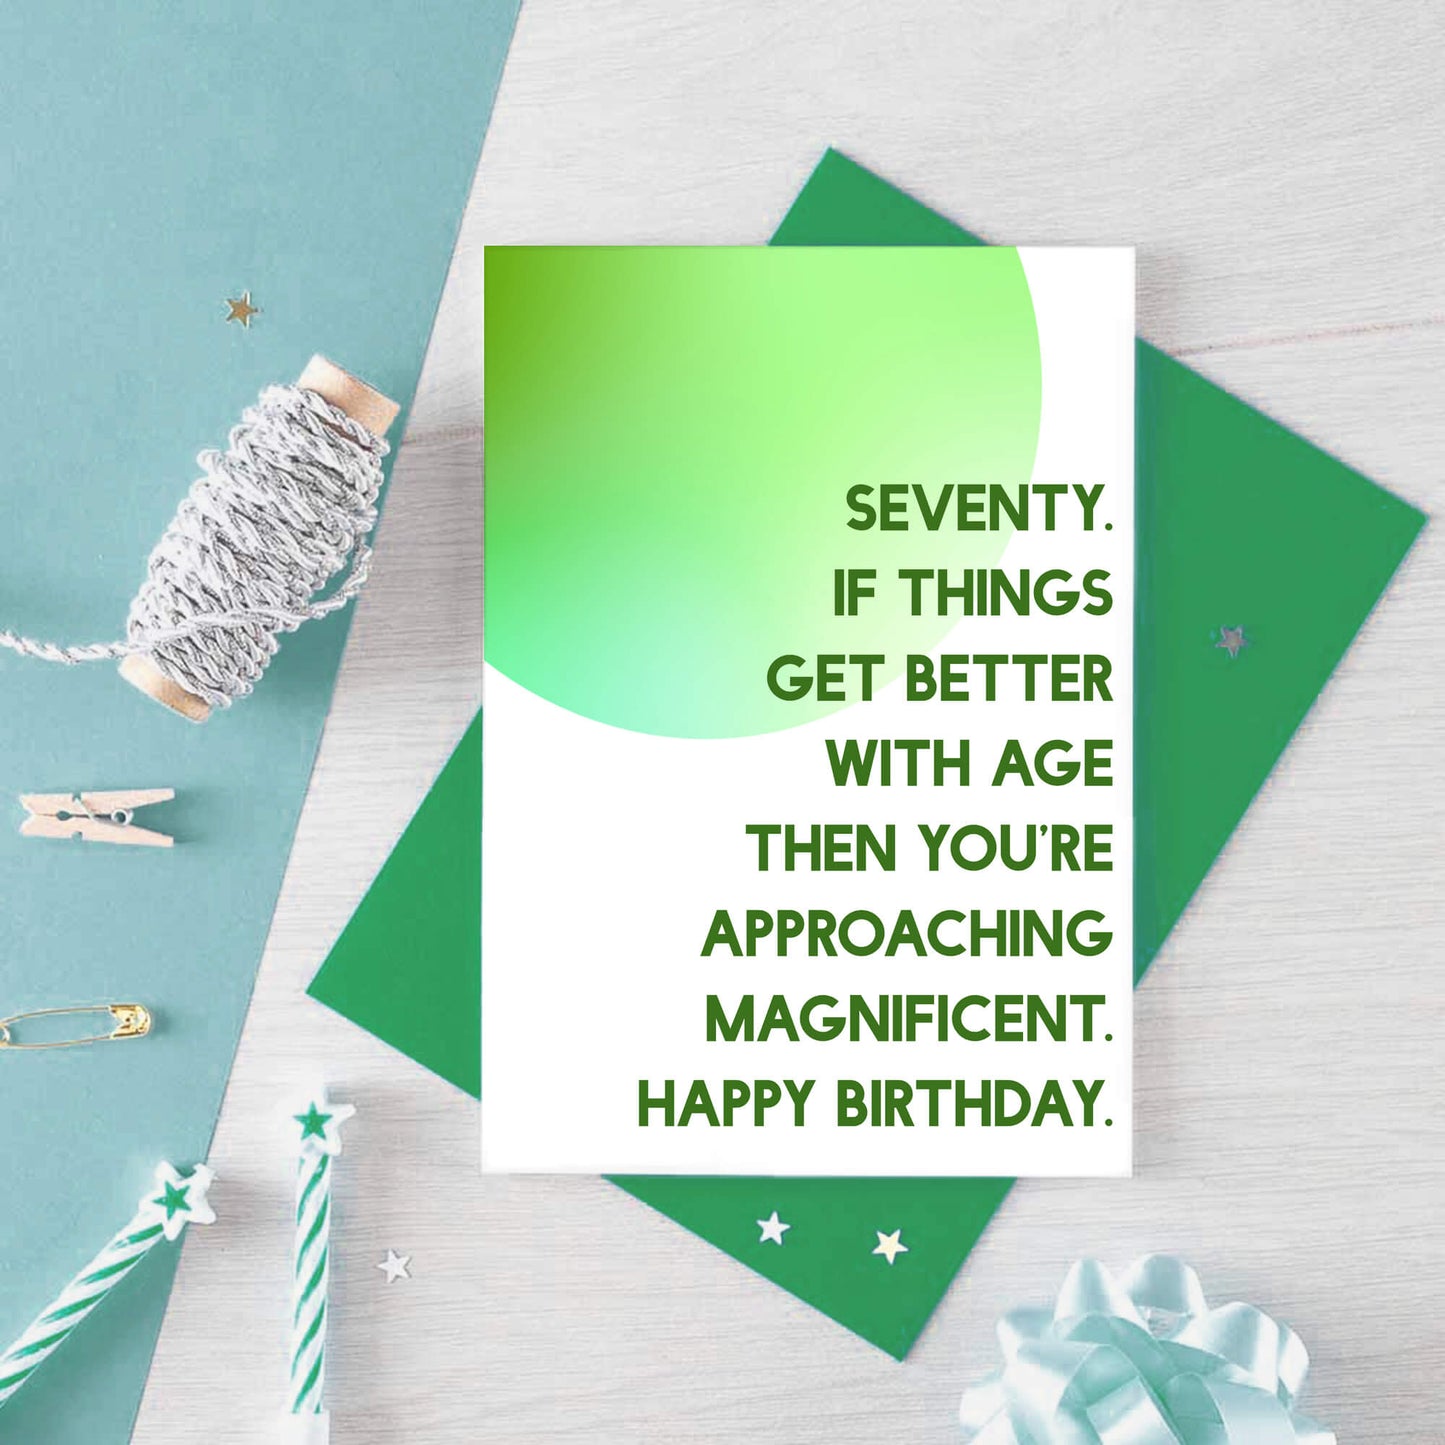 70th Birthday Card by SixElevenCreations. Reads Seventy. If things get better with age then you're approaching magnificent. Happy birthday. Product Code SE2058A6